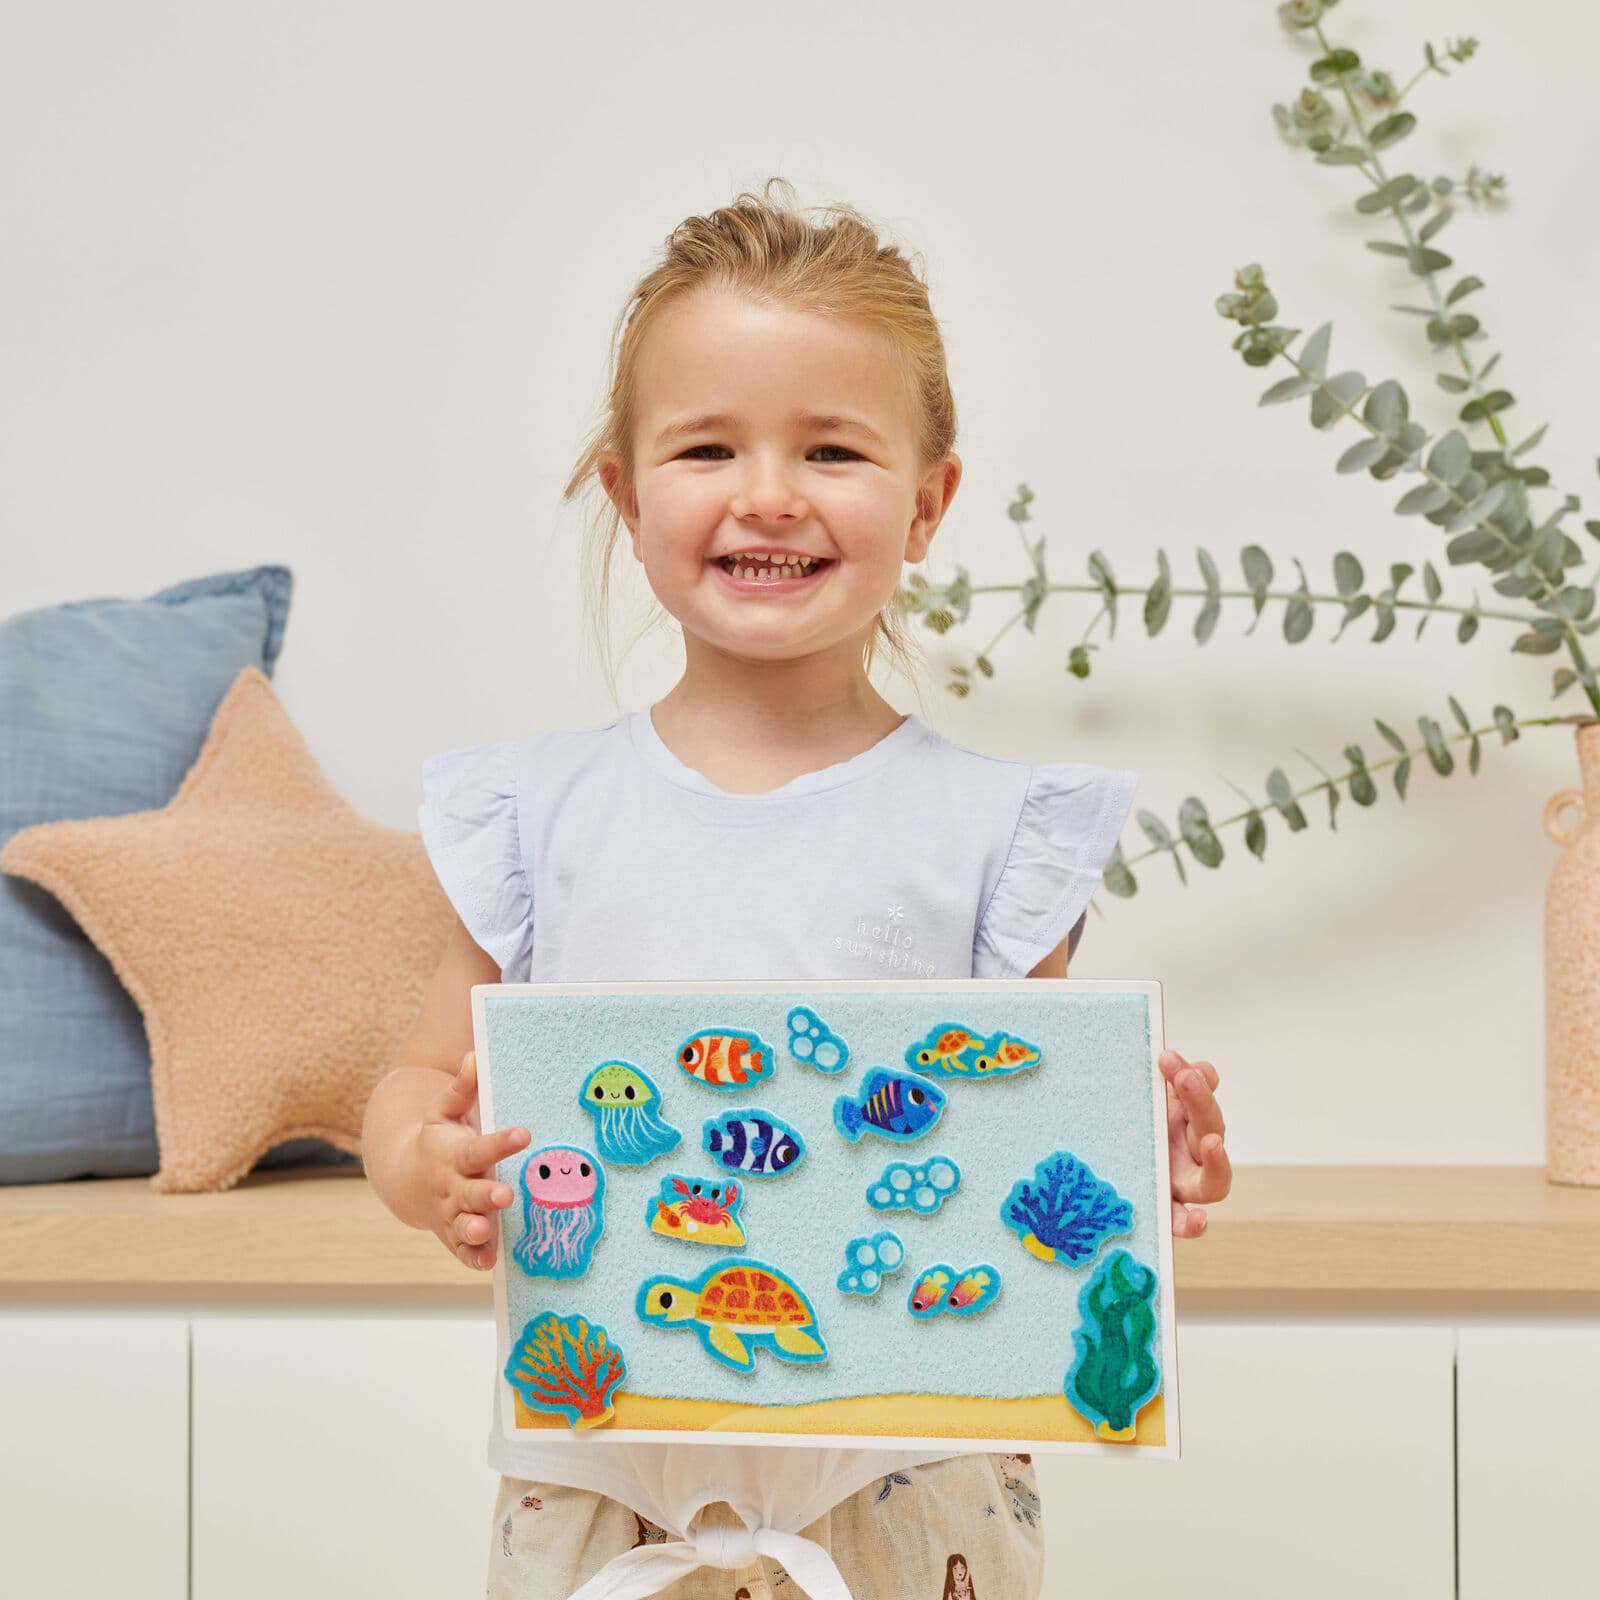 Tiger Tribe Felt Stories Under The Sea - lifestyle image with felt board